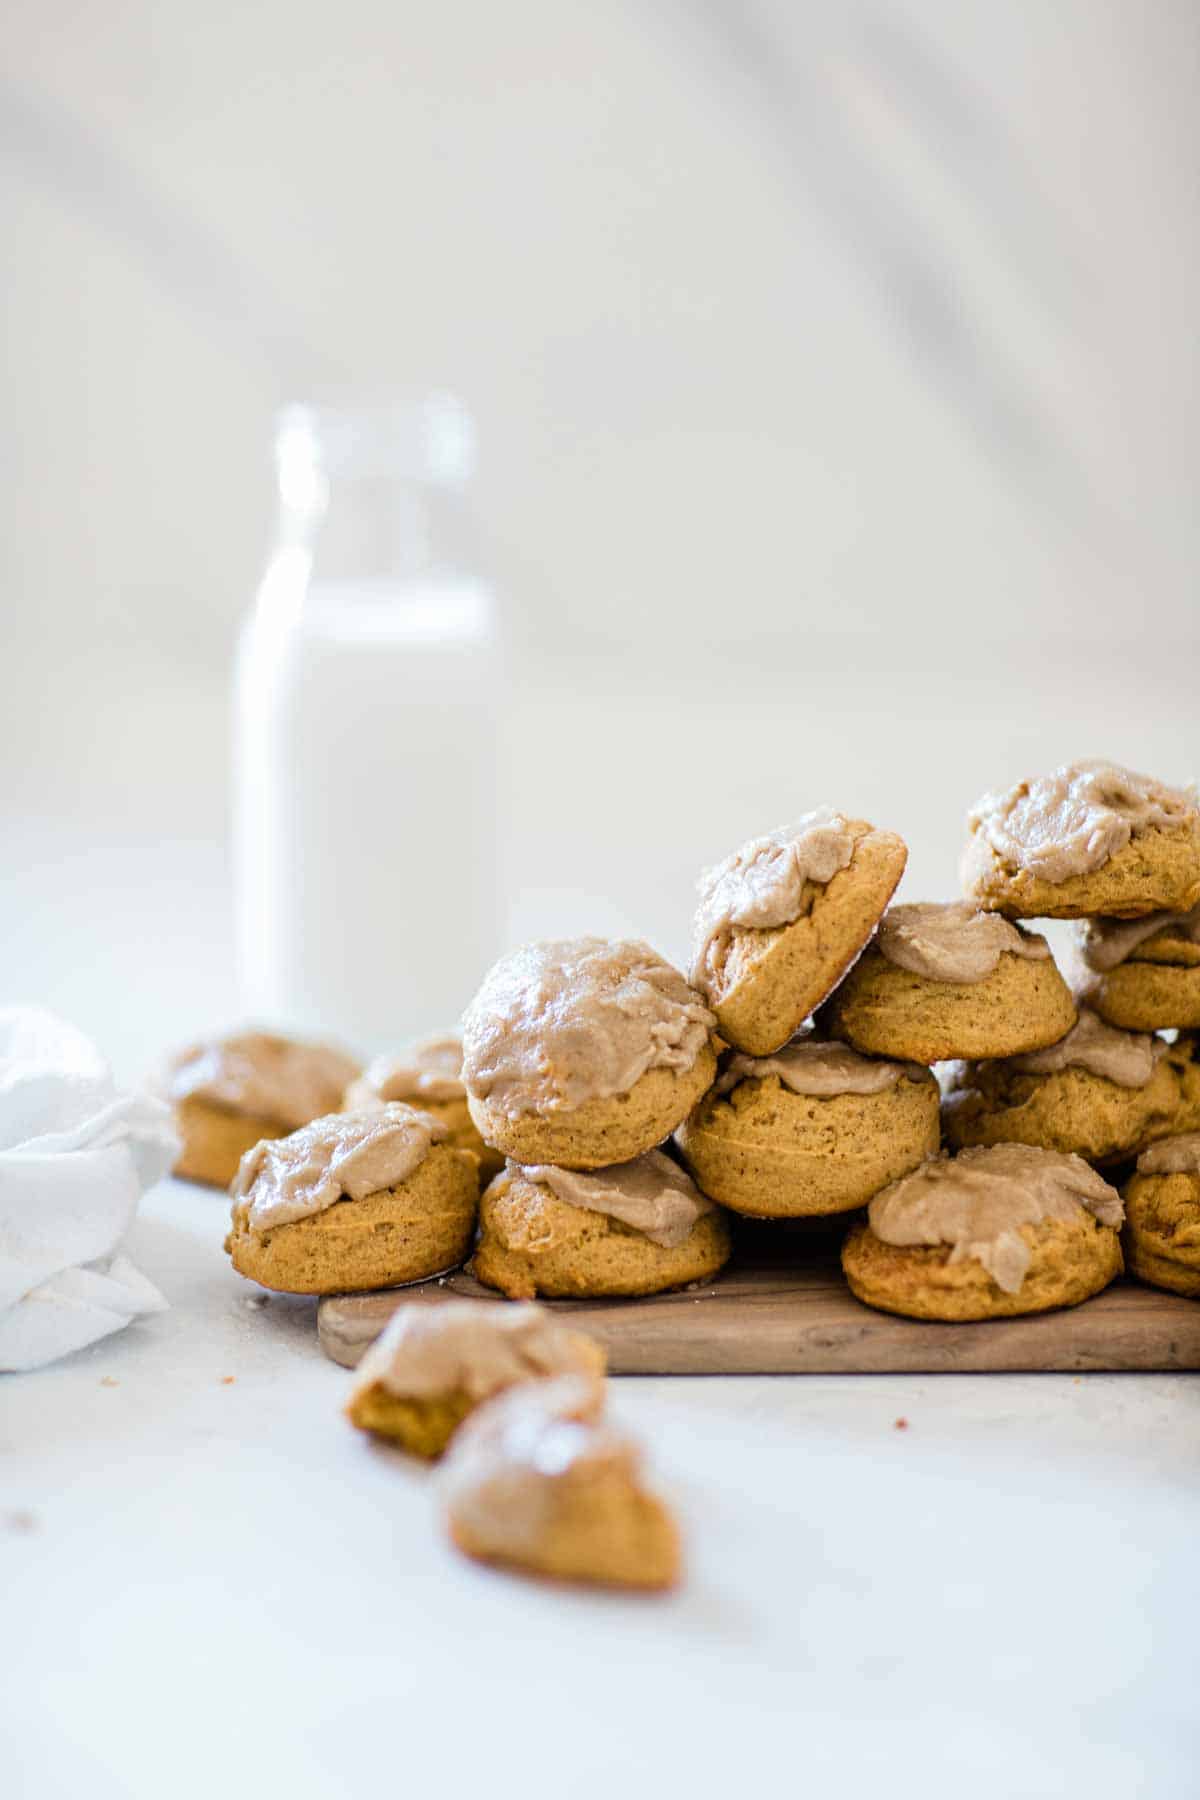 A large scatter of soft pumpkin cookies on a wooden board. There is a bottle of milk in the background.